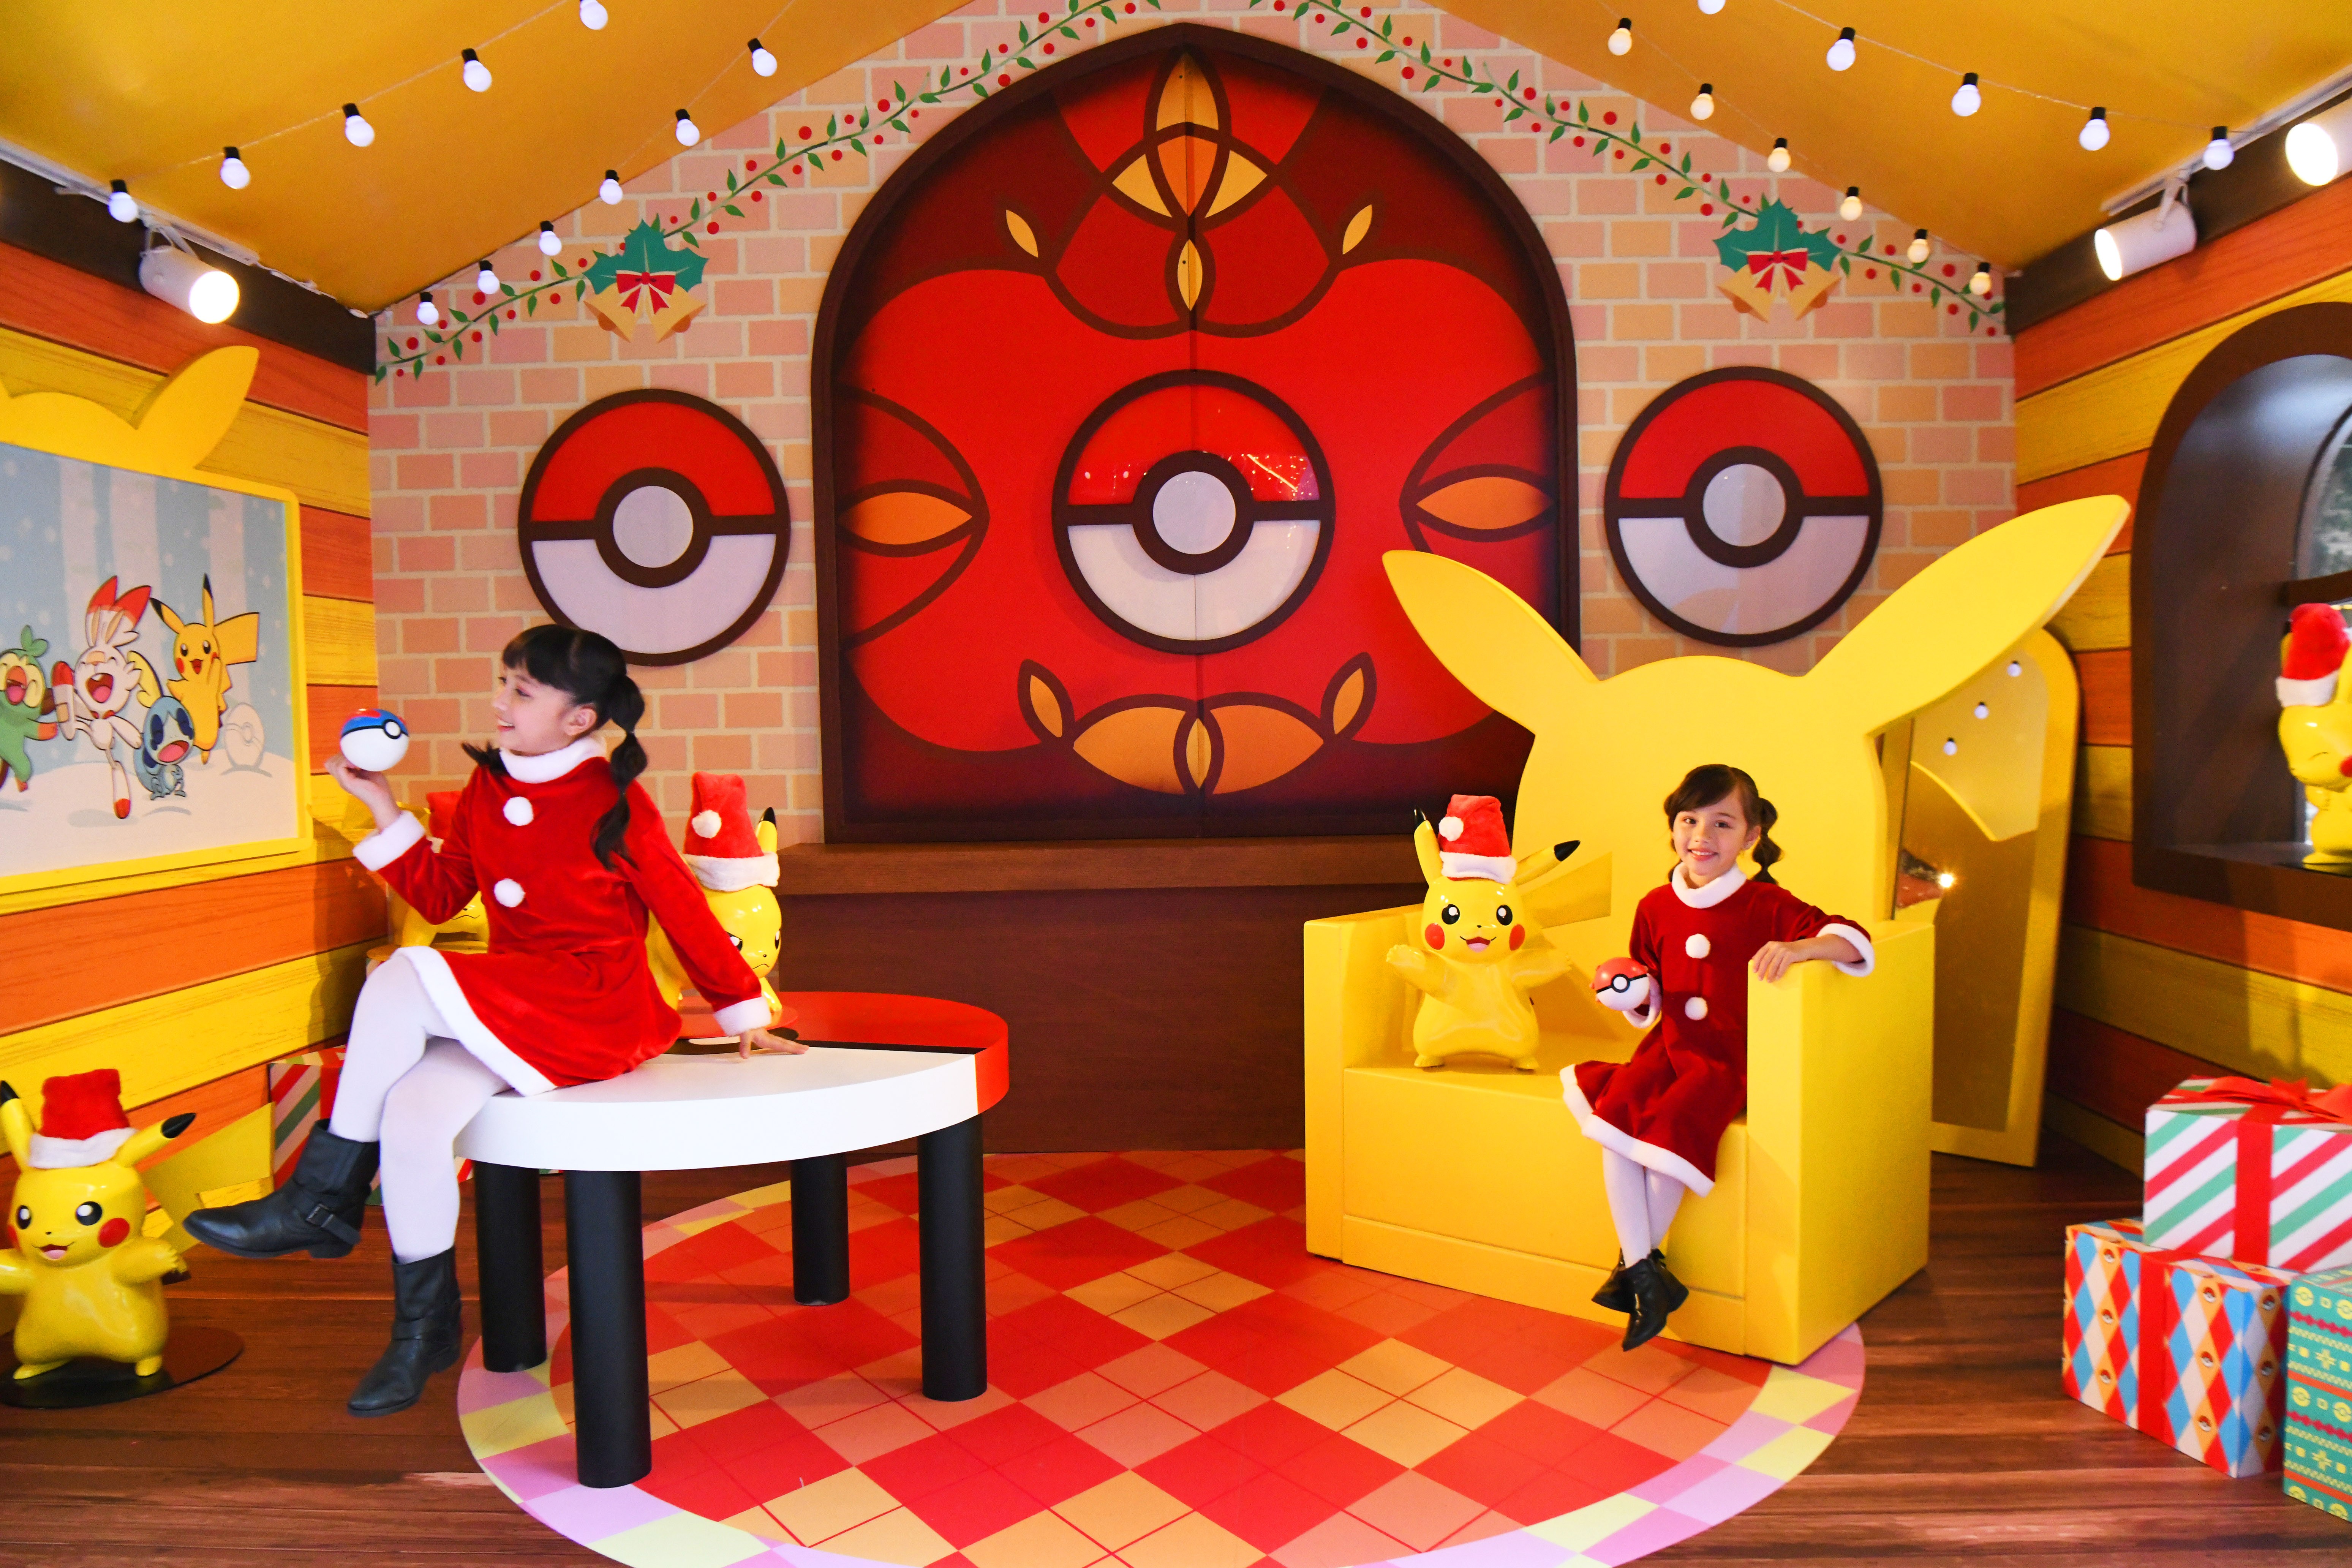 Japanese anime Pokémon is the focus of this year’s Christmas installation at Time Square, Causeway Bay.